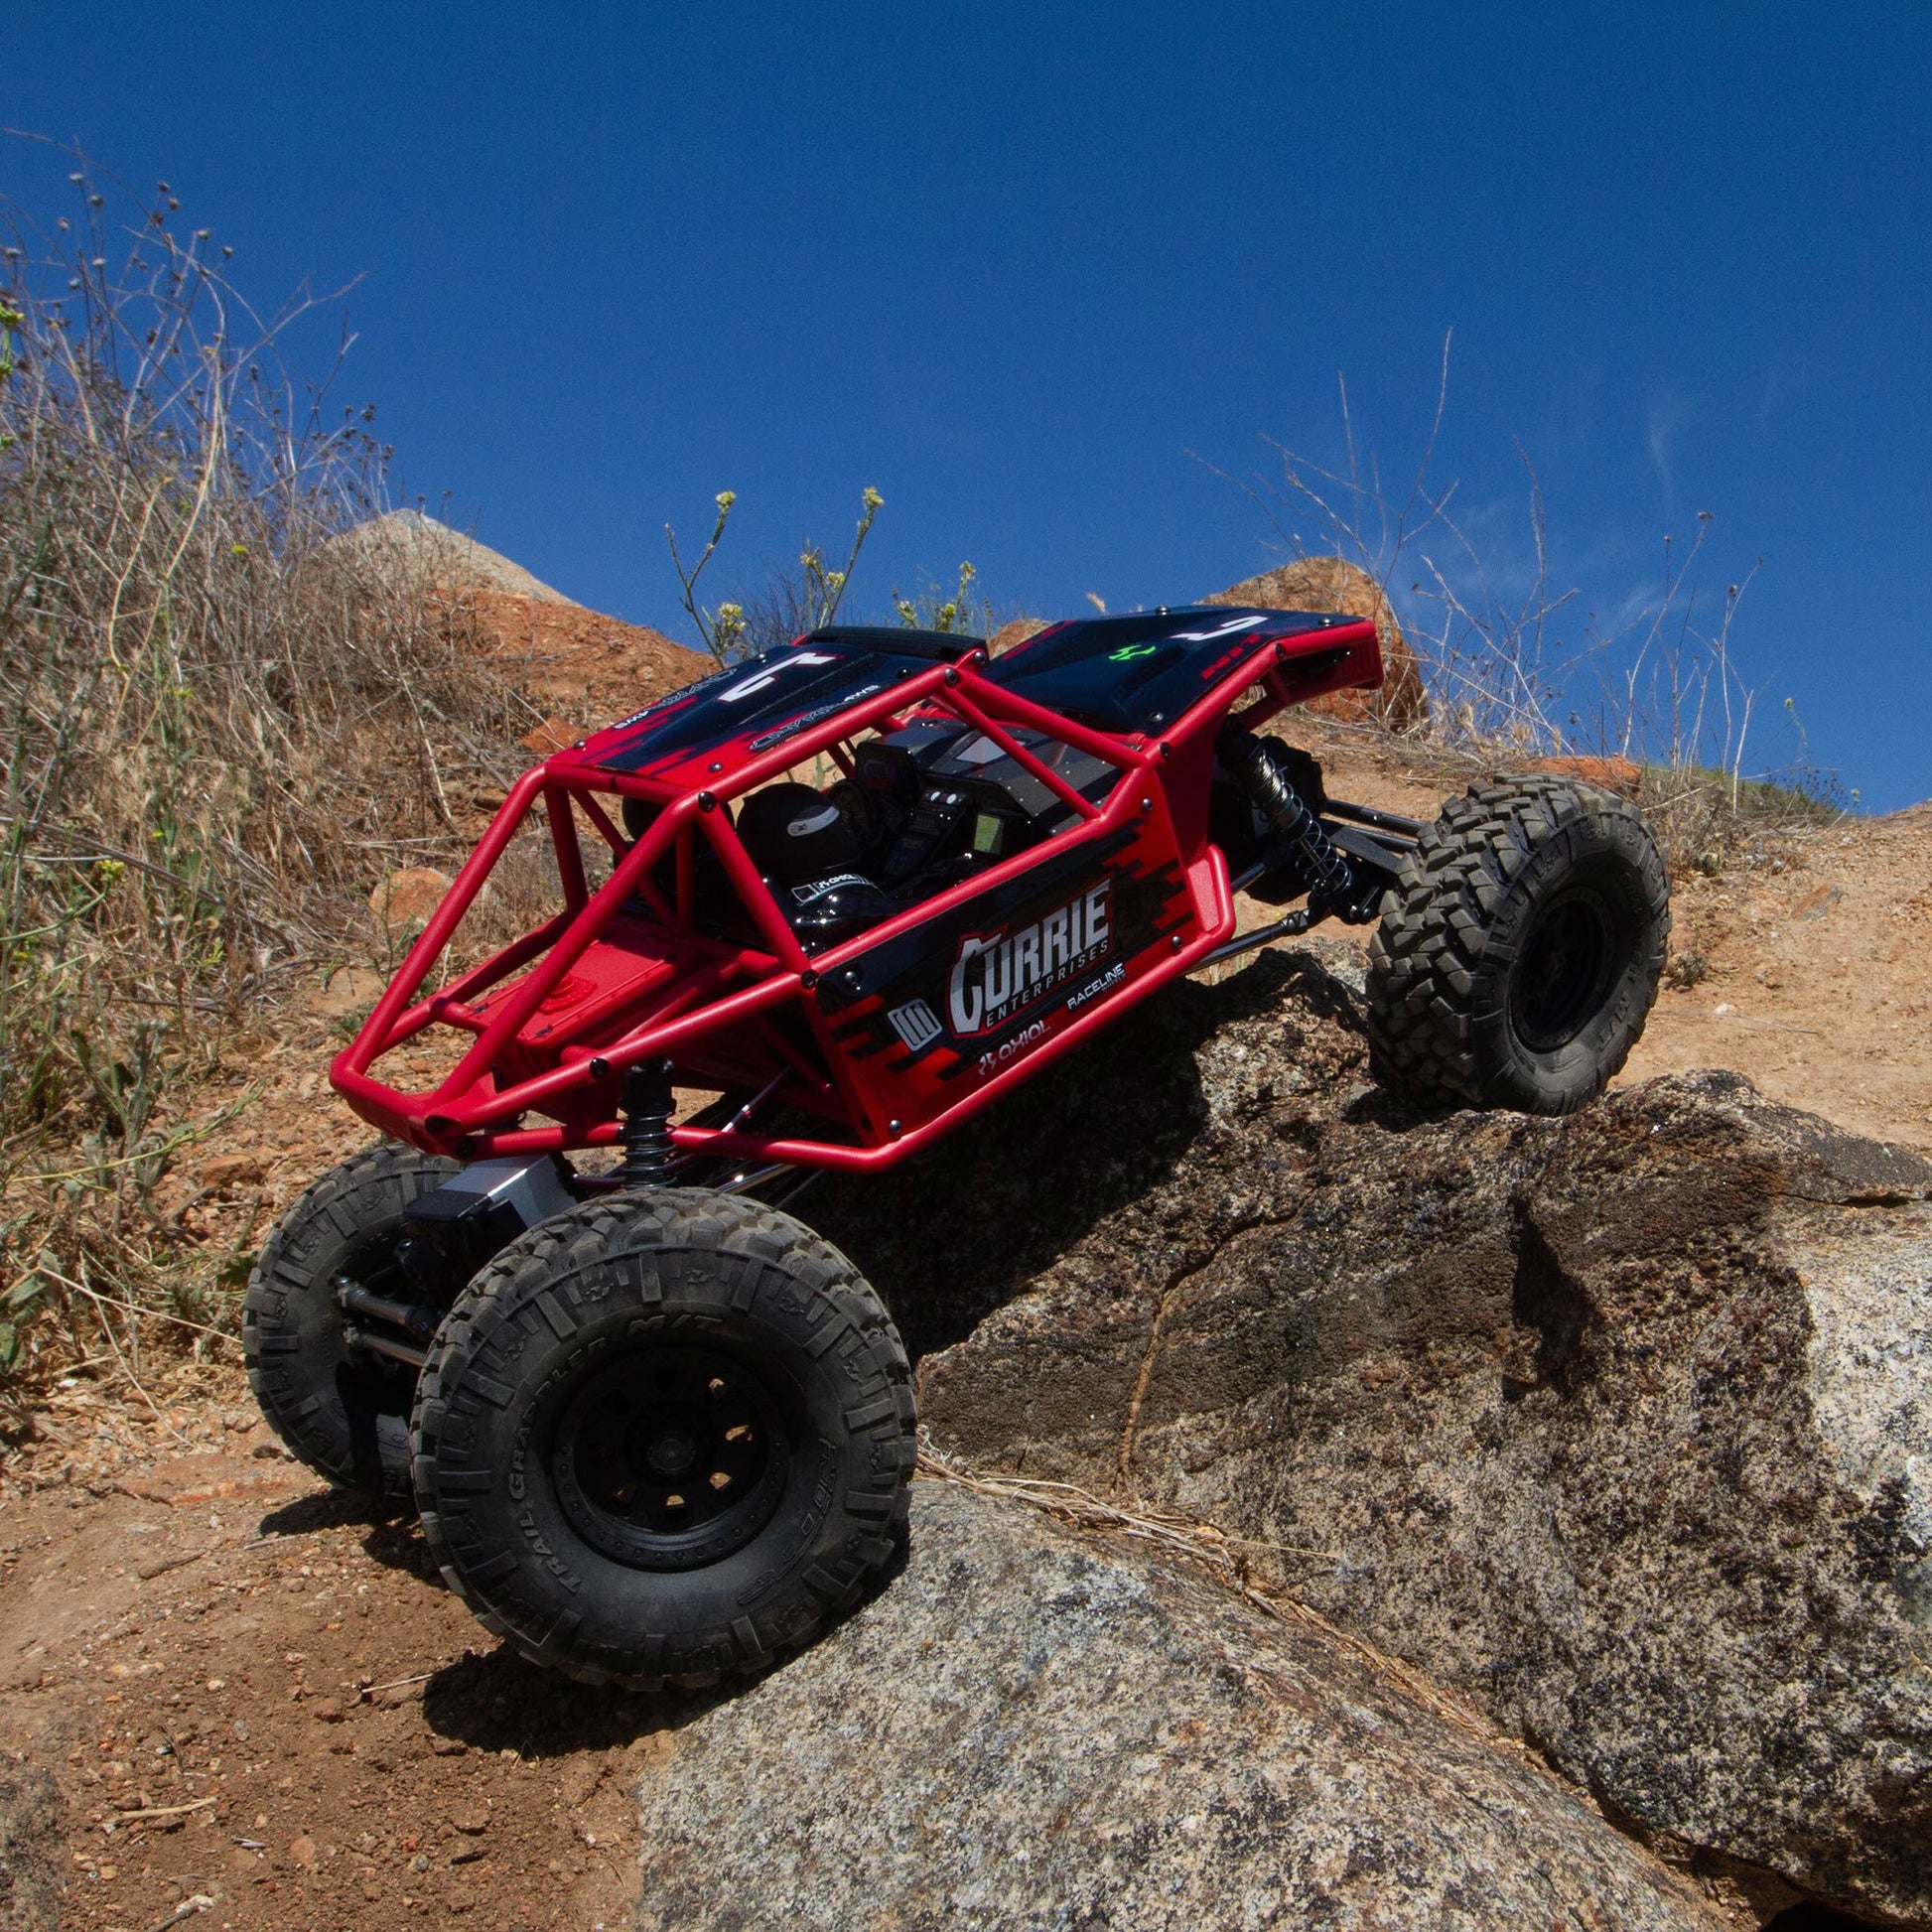 Axial 1/10 Capra 1.9 4WS Unlimited Trail Buggy RTR, Red AXI03022BT1